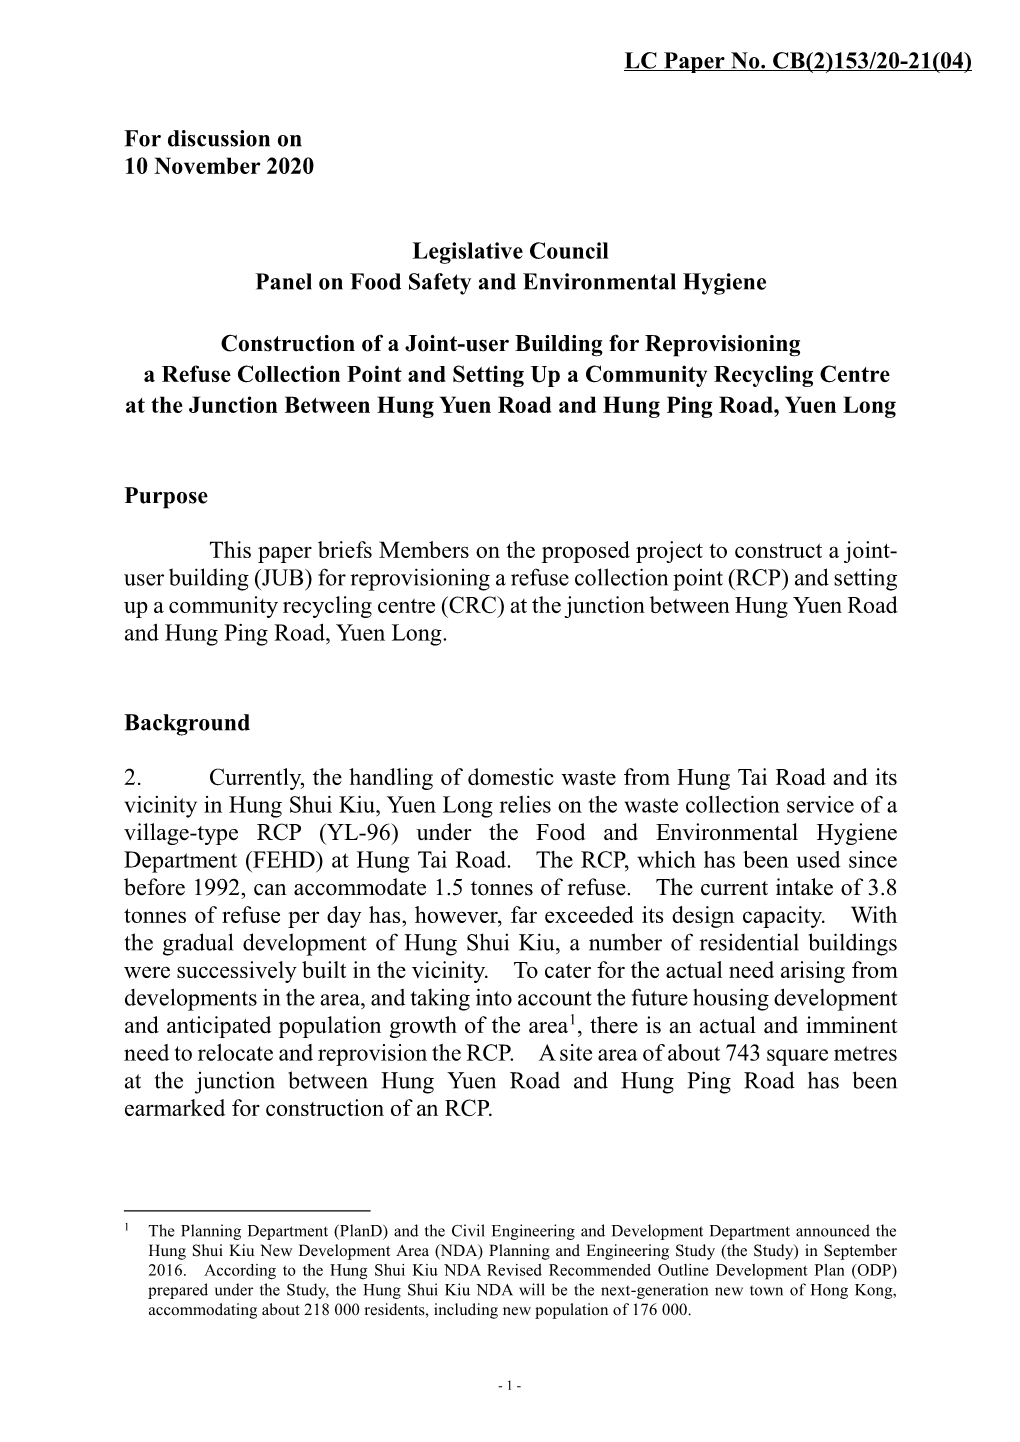 For Discussion on 10 November 2020 Legislative Council Panel on Food